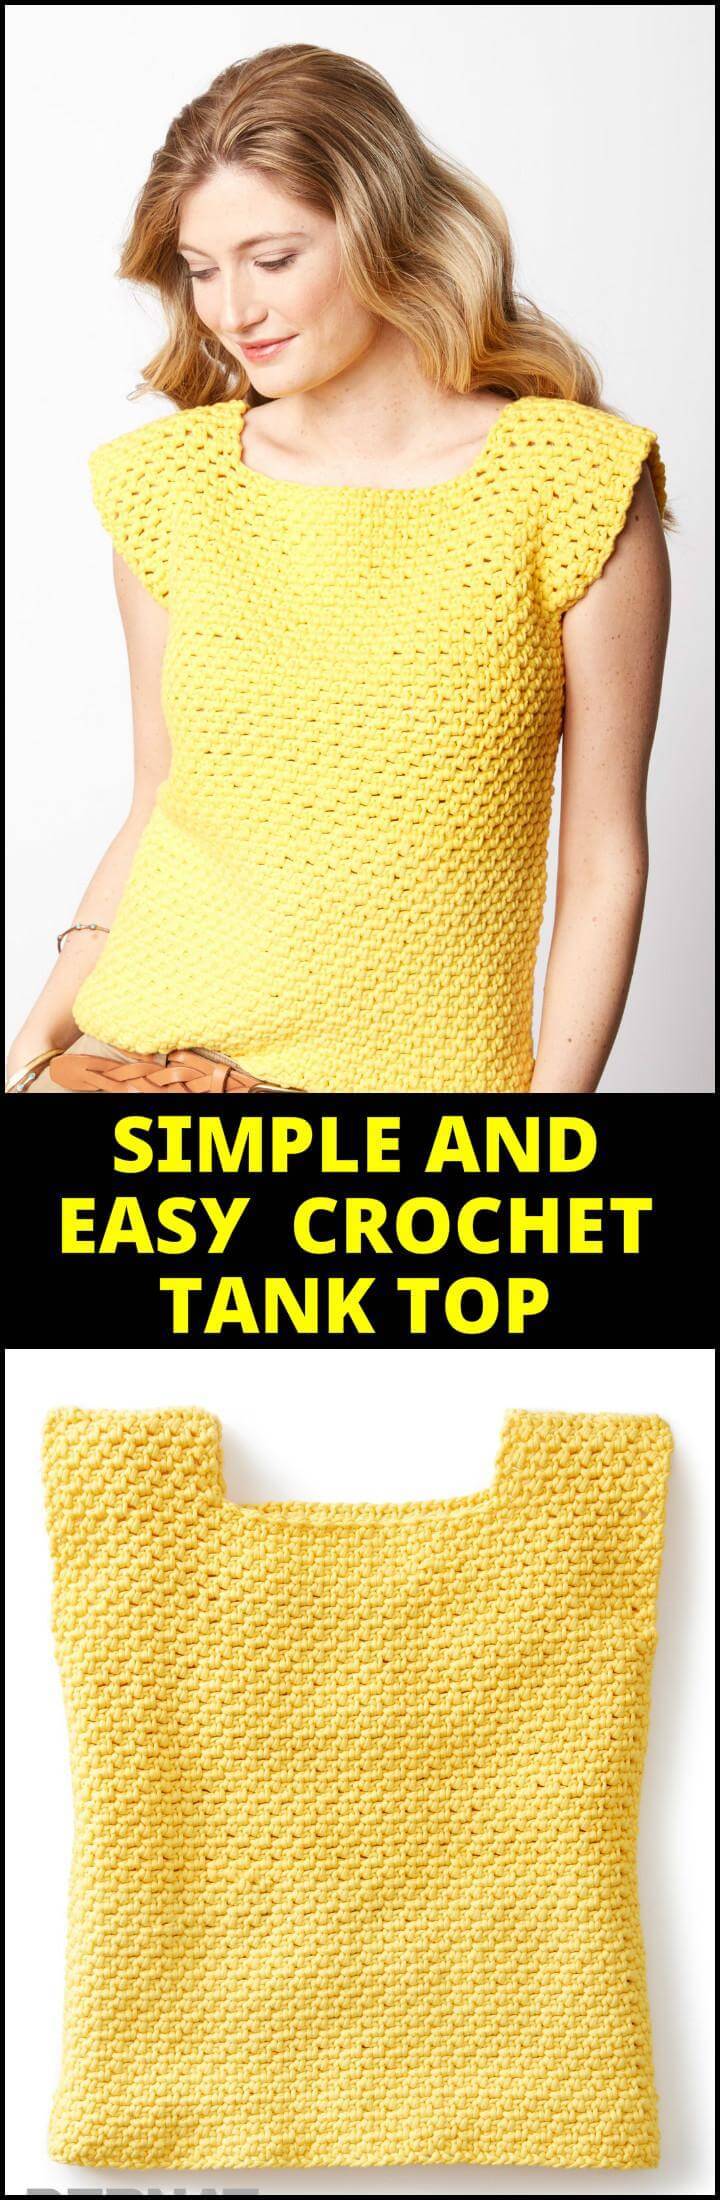 Simple and Easy Crochet Tank Top